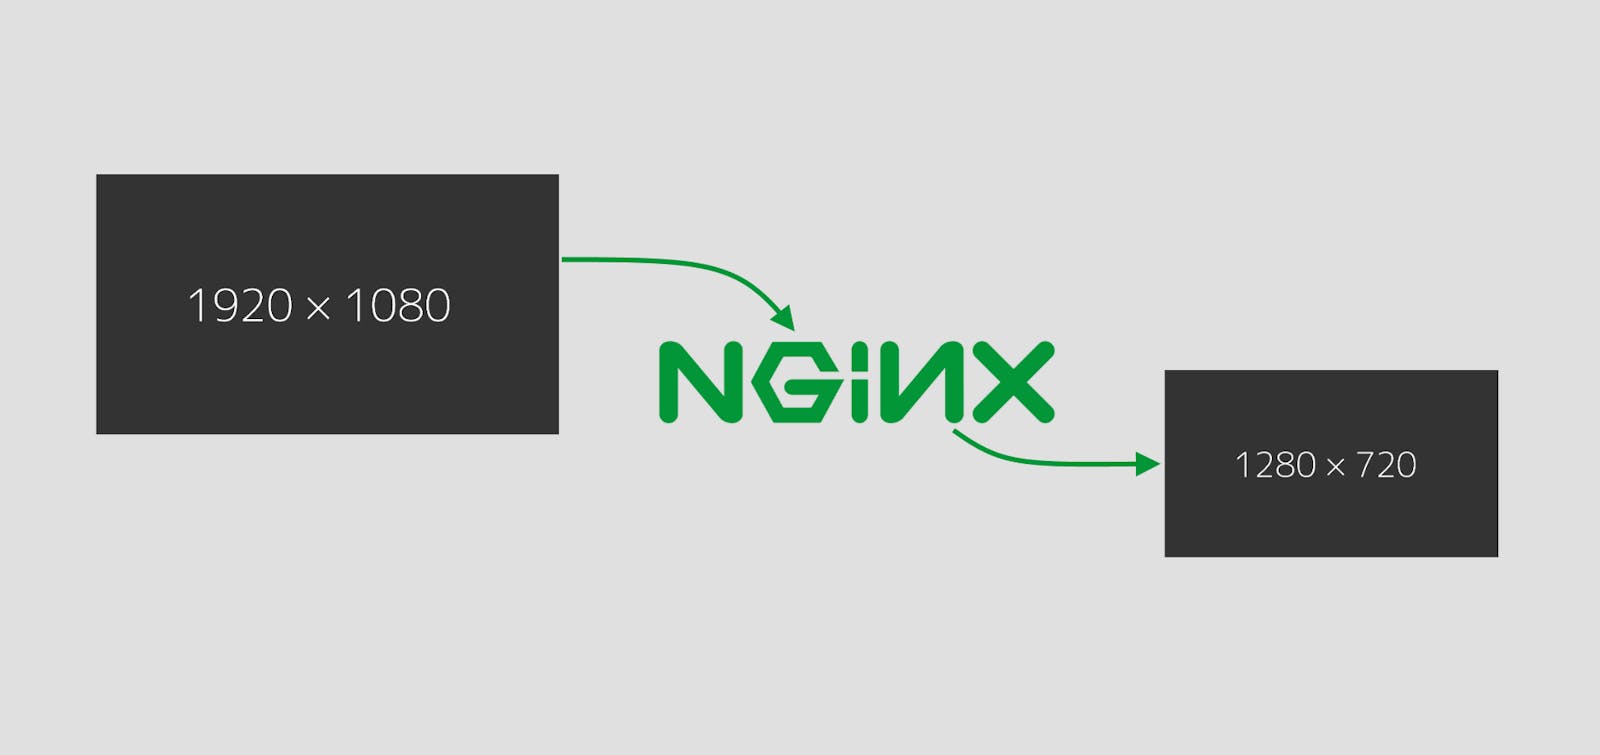 Use nginx to resize your images